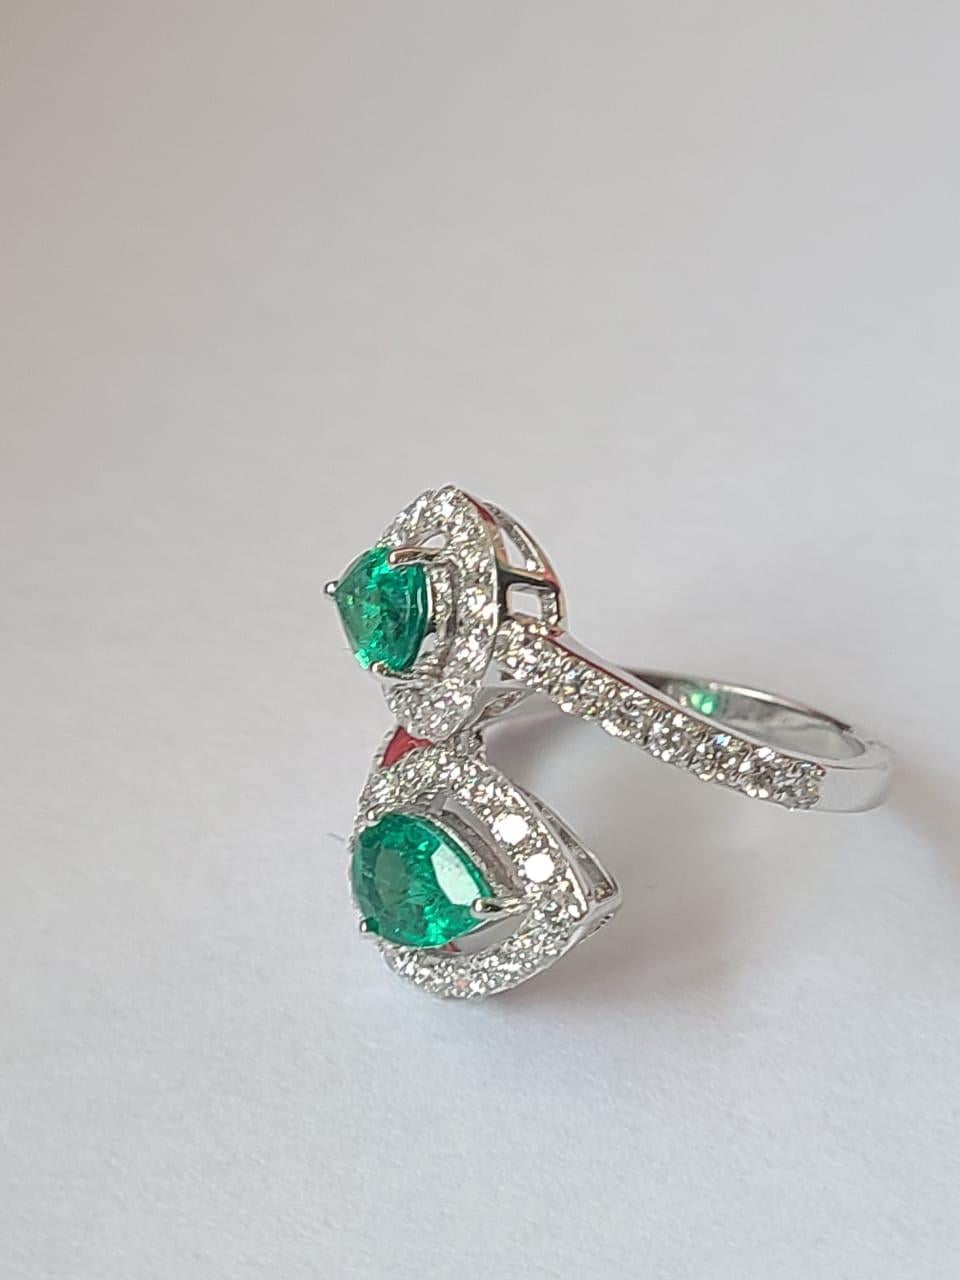 Natural Zambian Emerald & Diamonds Cocktail / Engagement Ring Set in 18K Gold 1